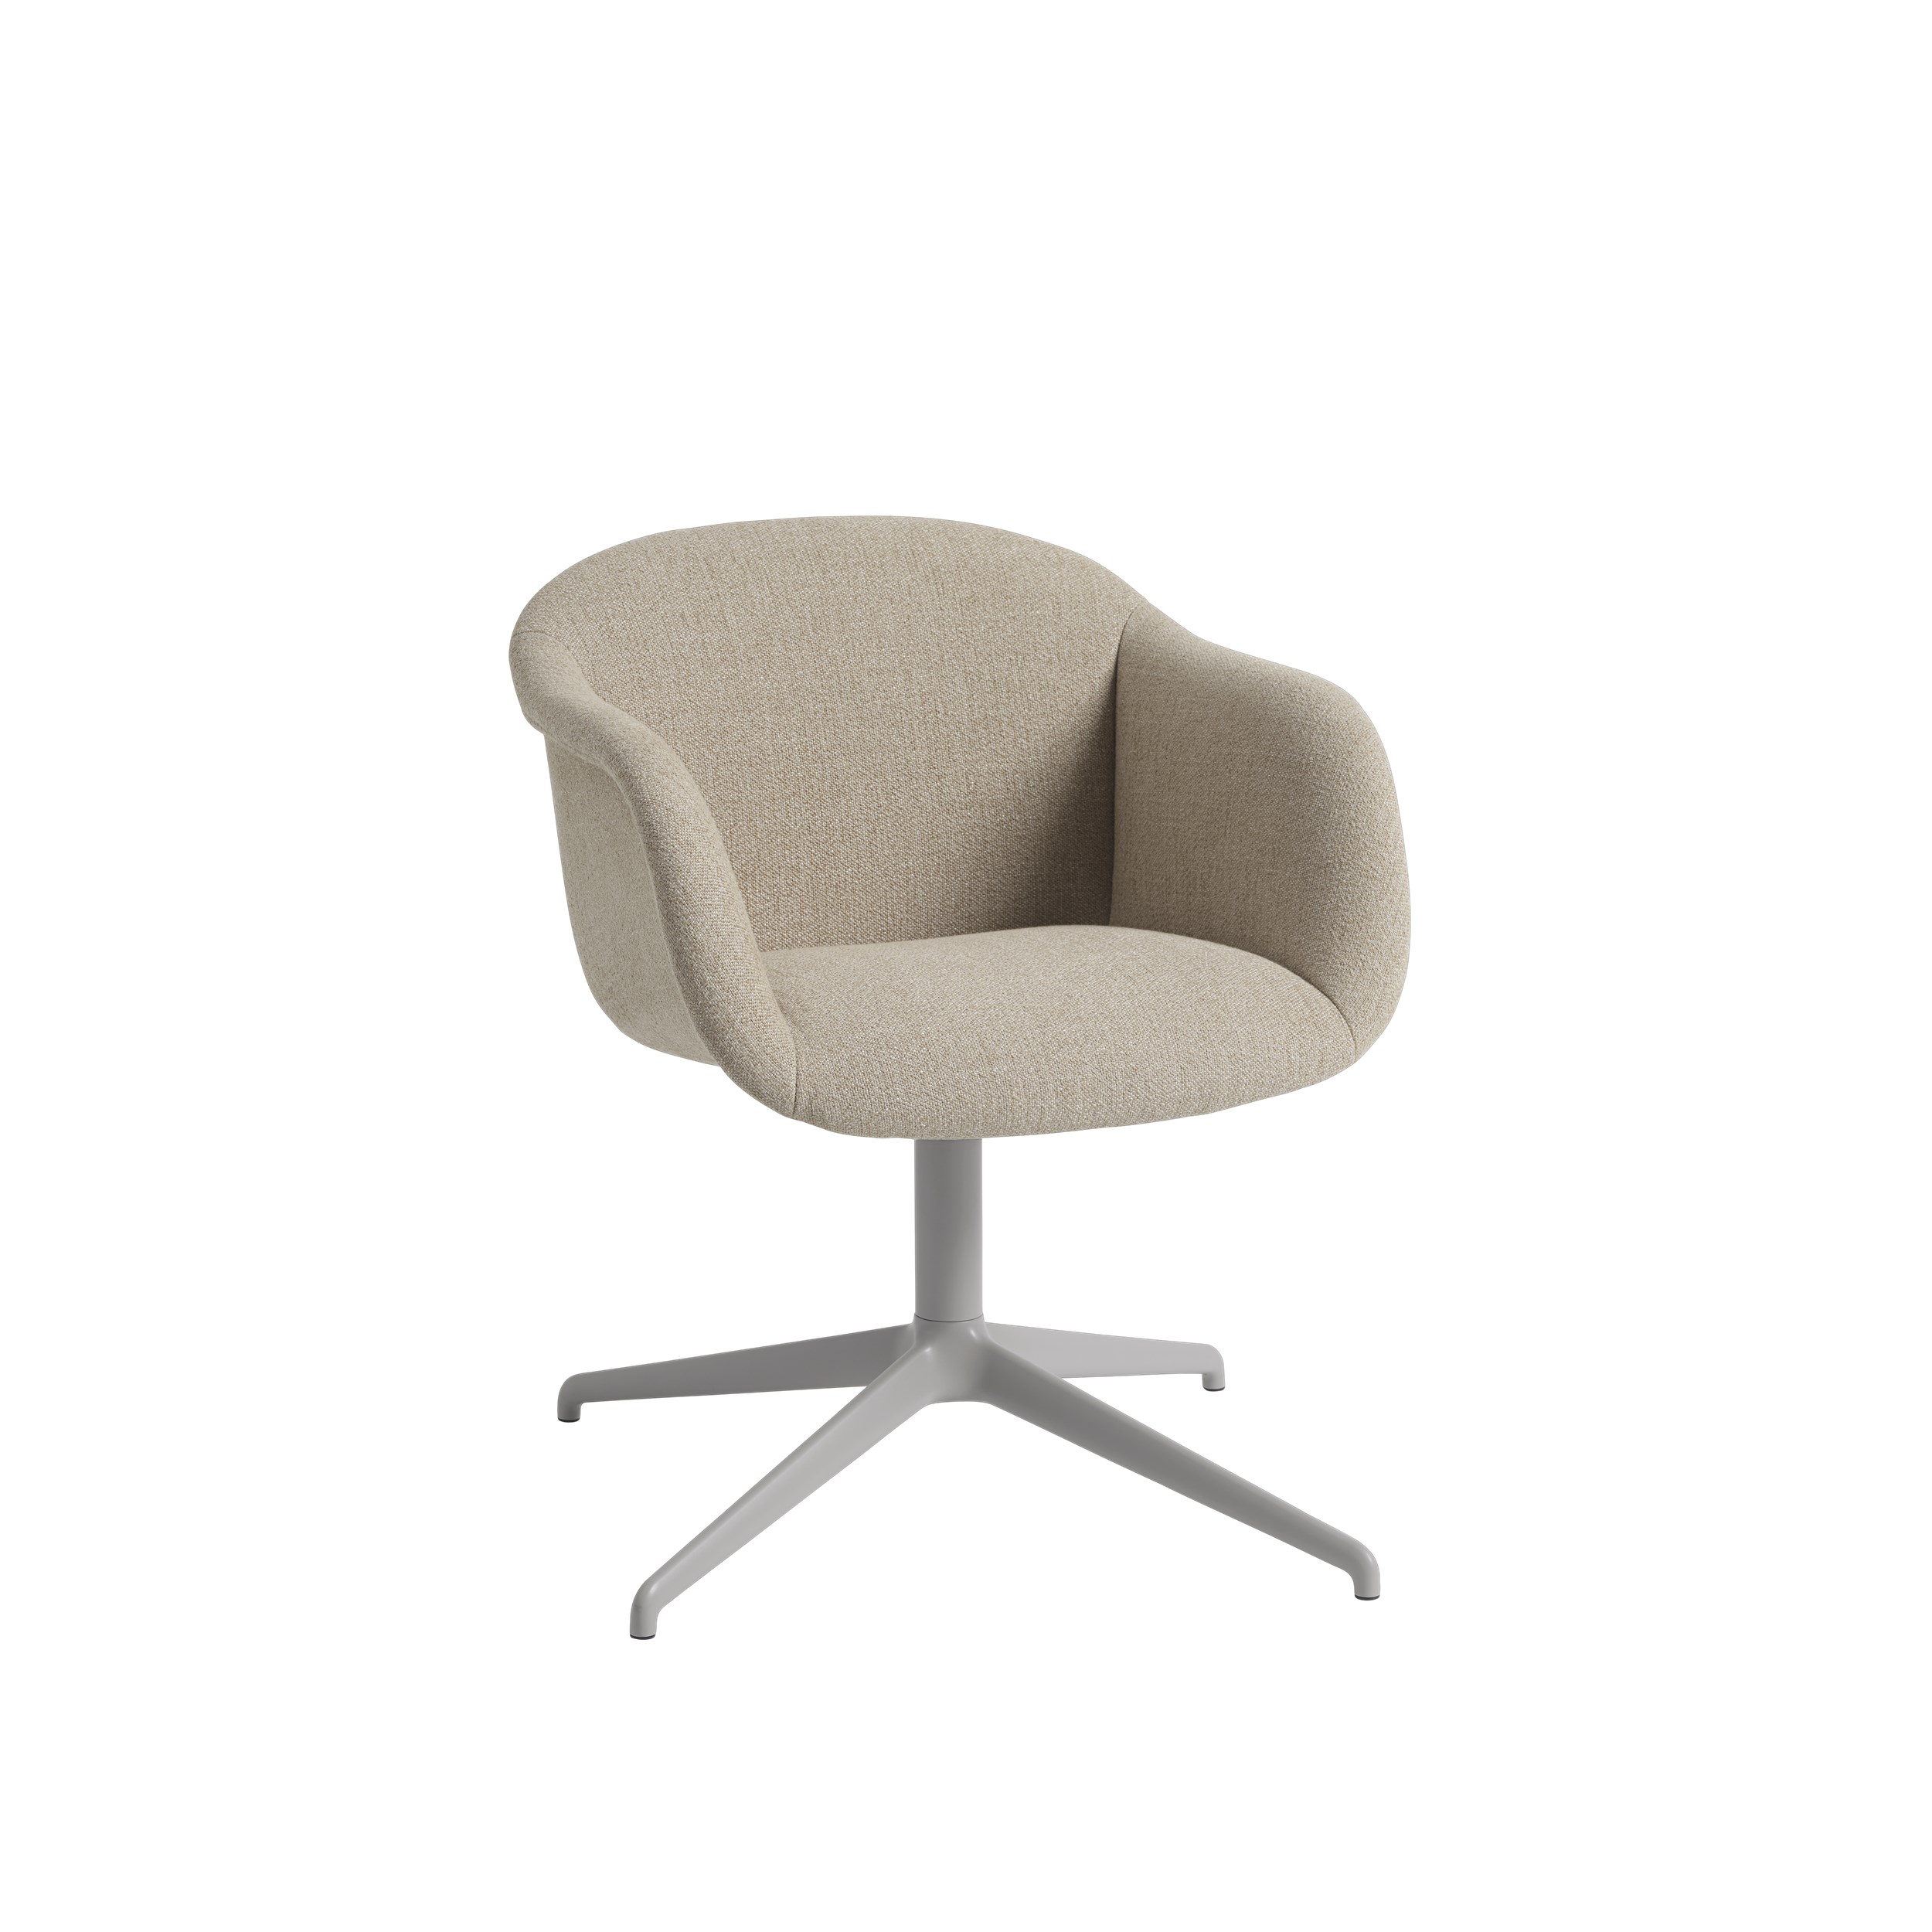 Fiber SOFT Swivel Chair in Fabric and Leather